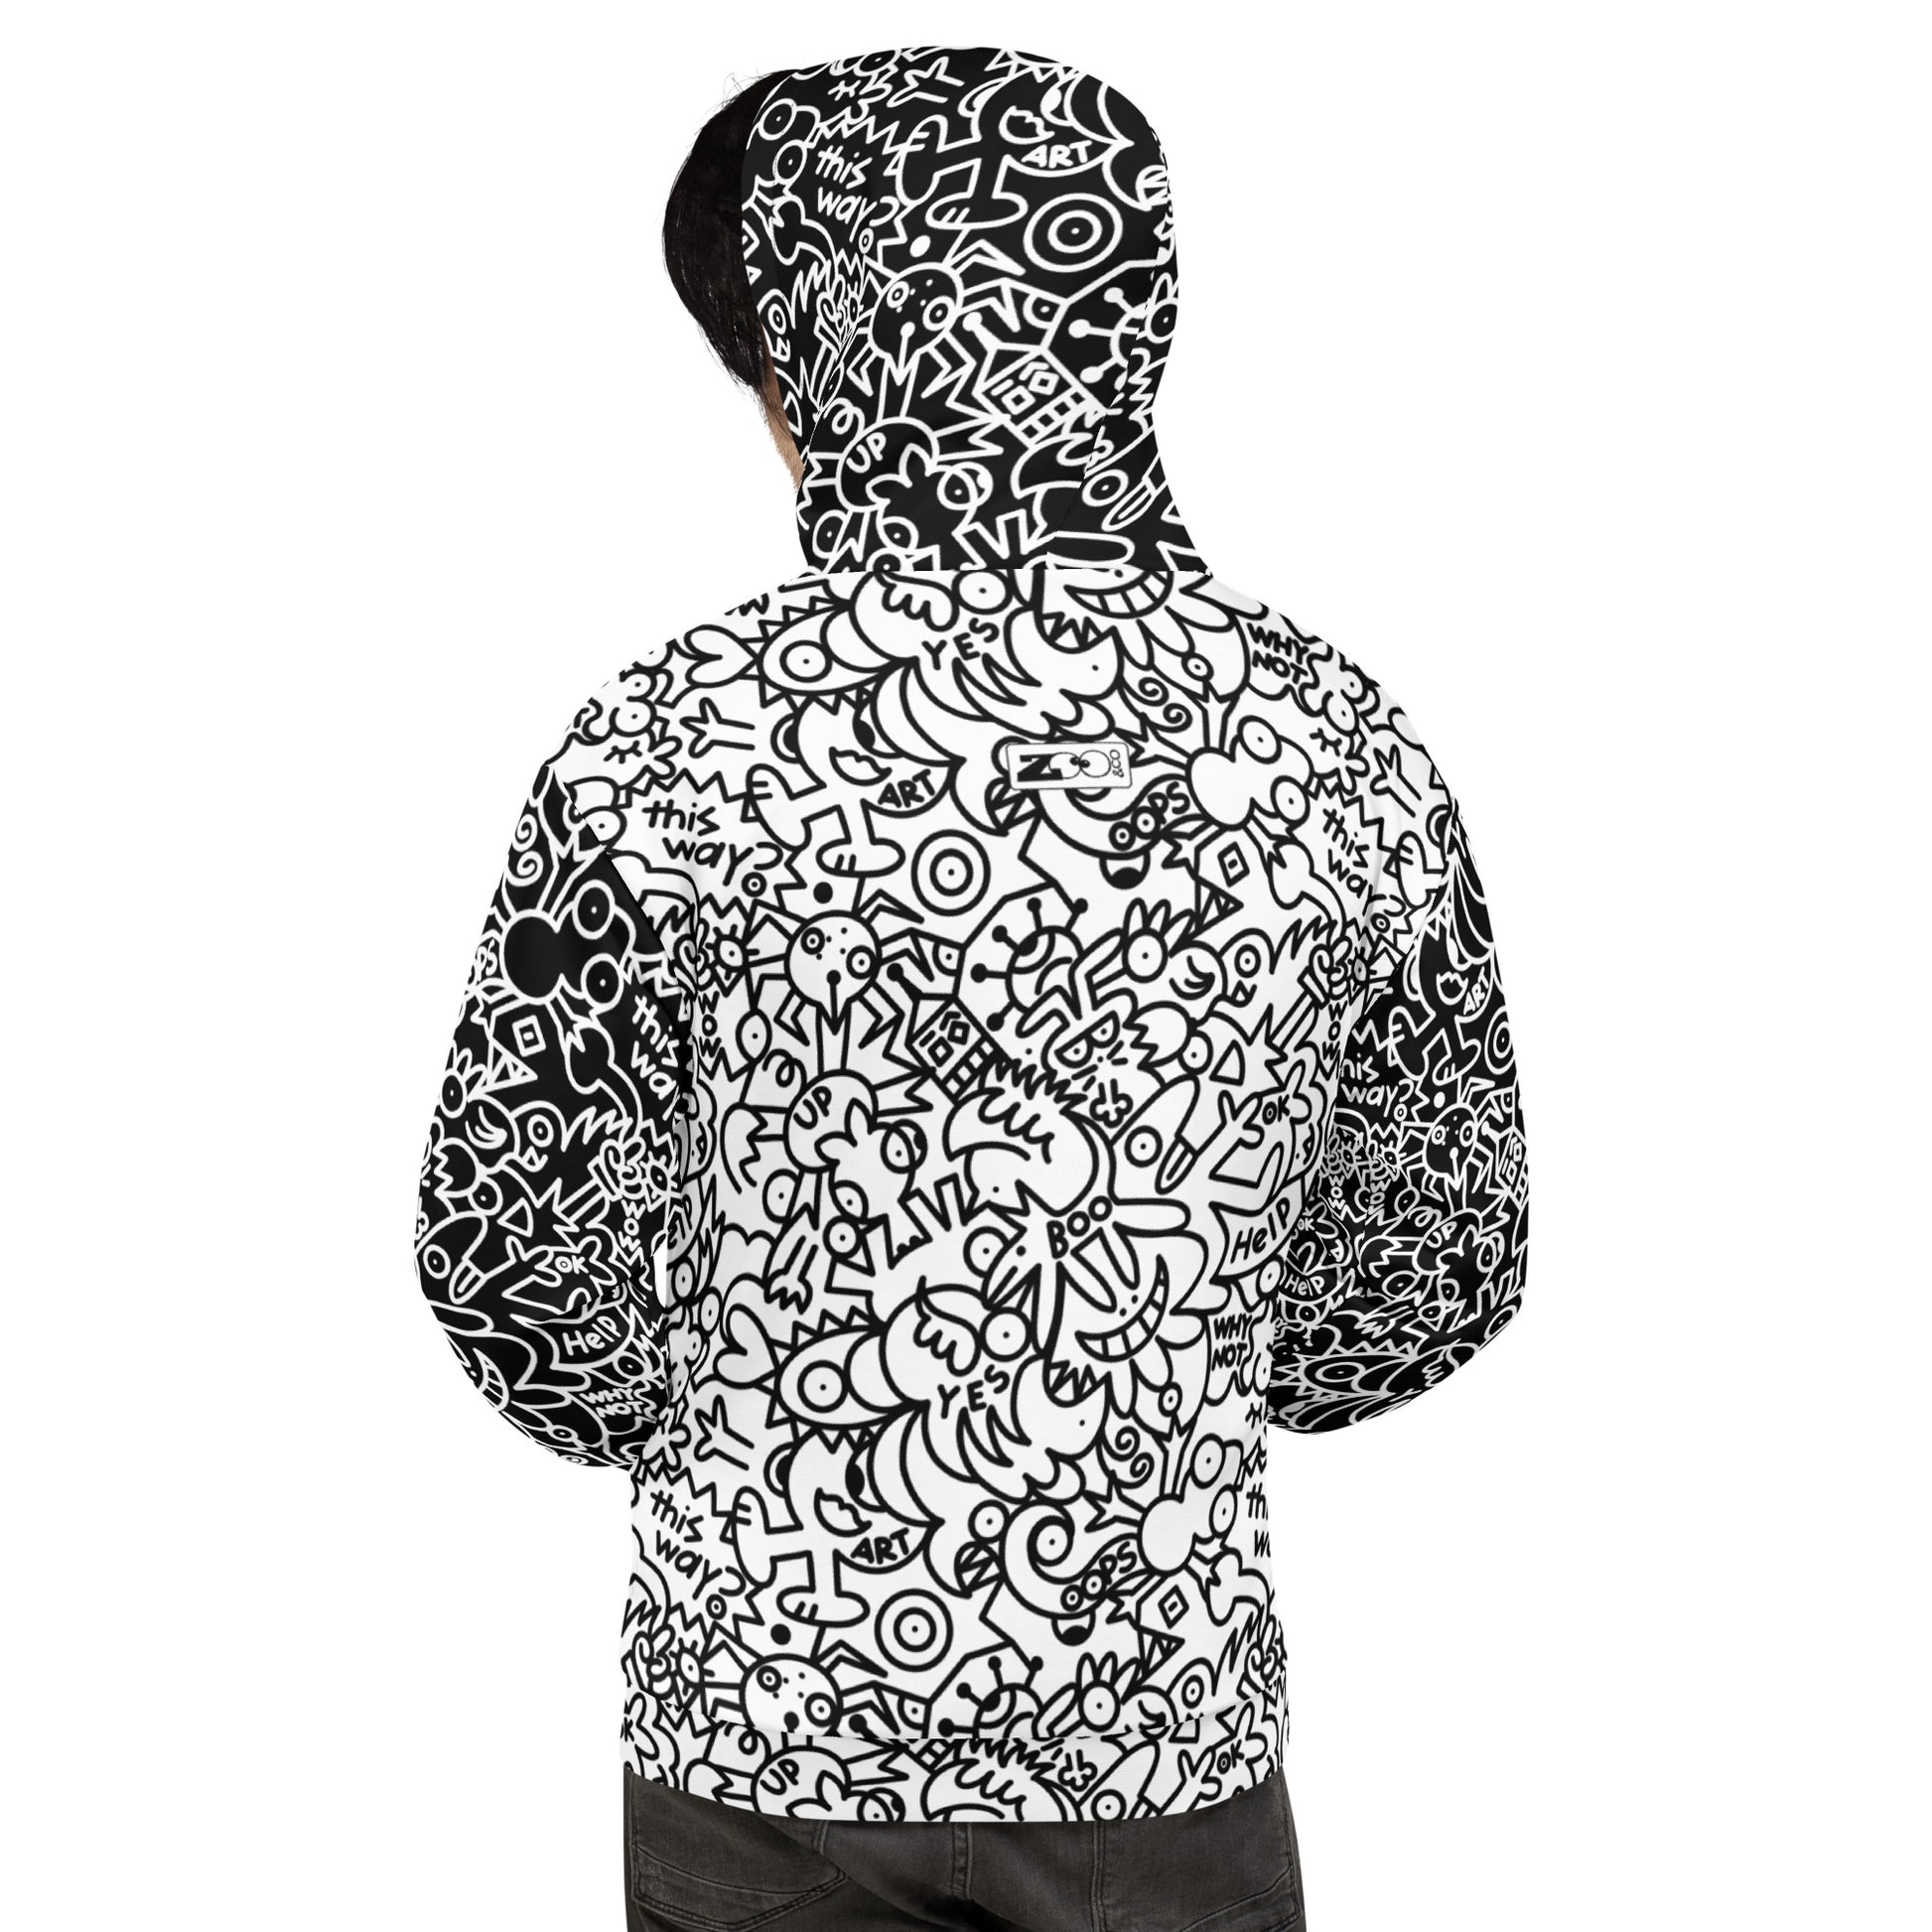 The Playful Power of Great Doodles for Bold People - Unisex Hoodie. Back view